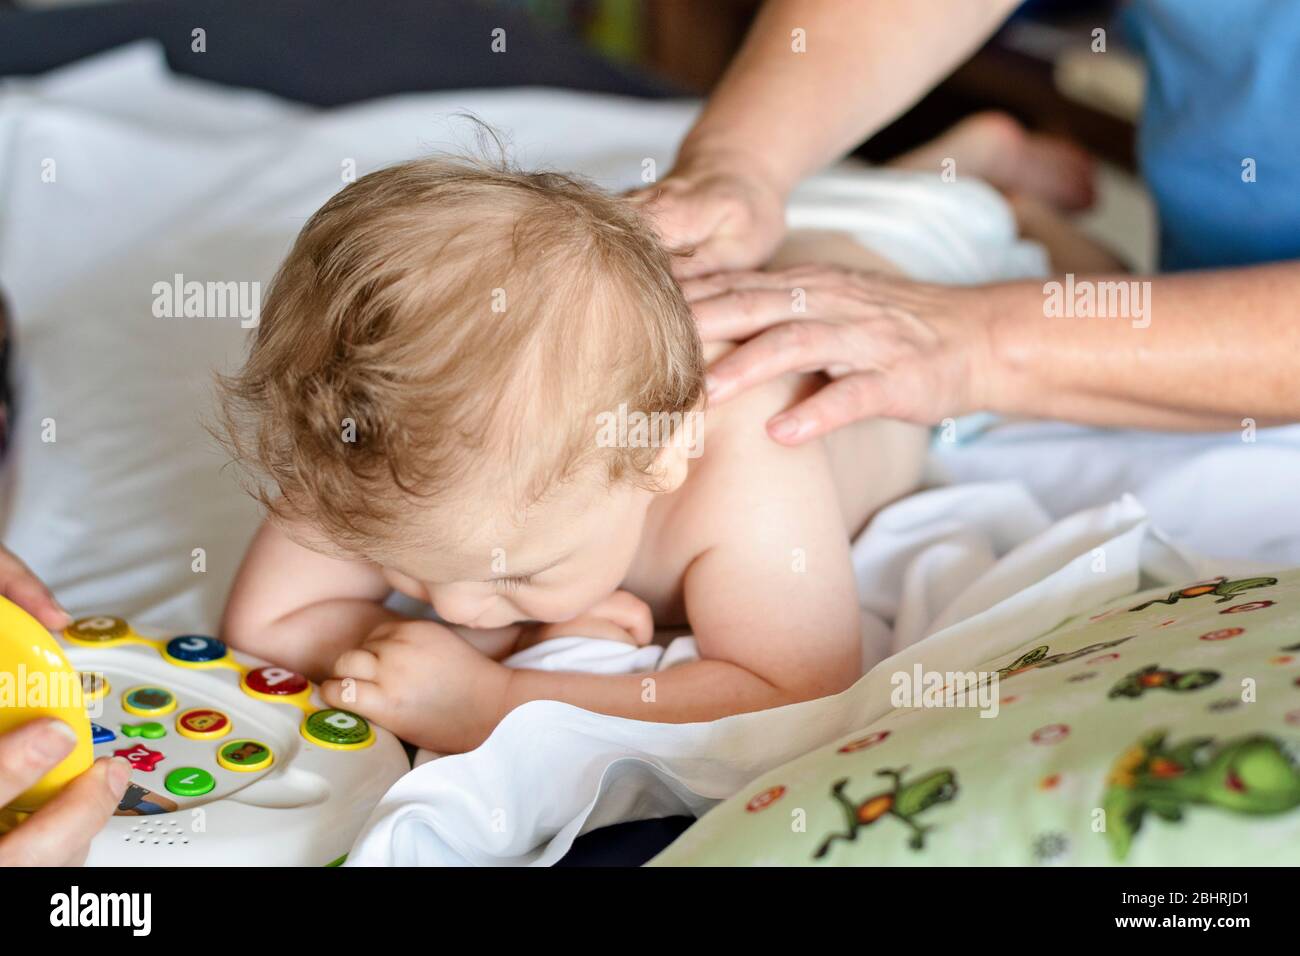 Baby having back massage in a rehabilitation center. Little child on therapy. Massage therapist massaging a baby. Stock Photo